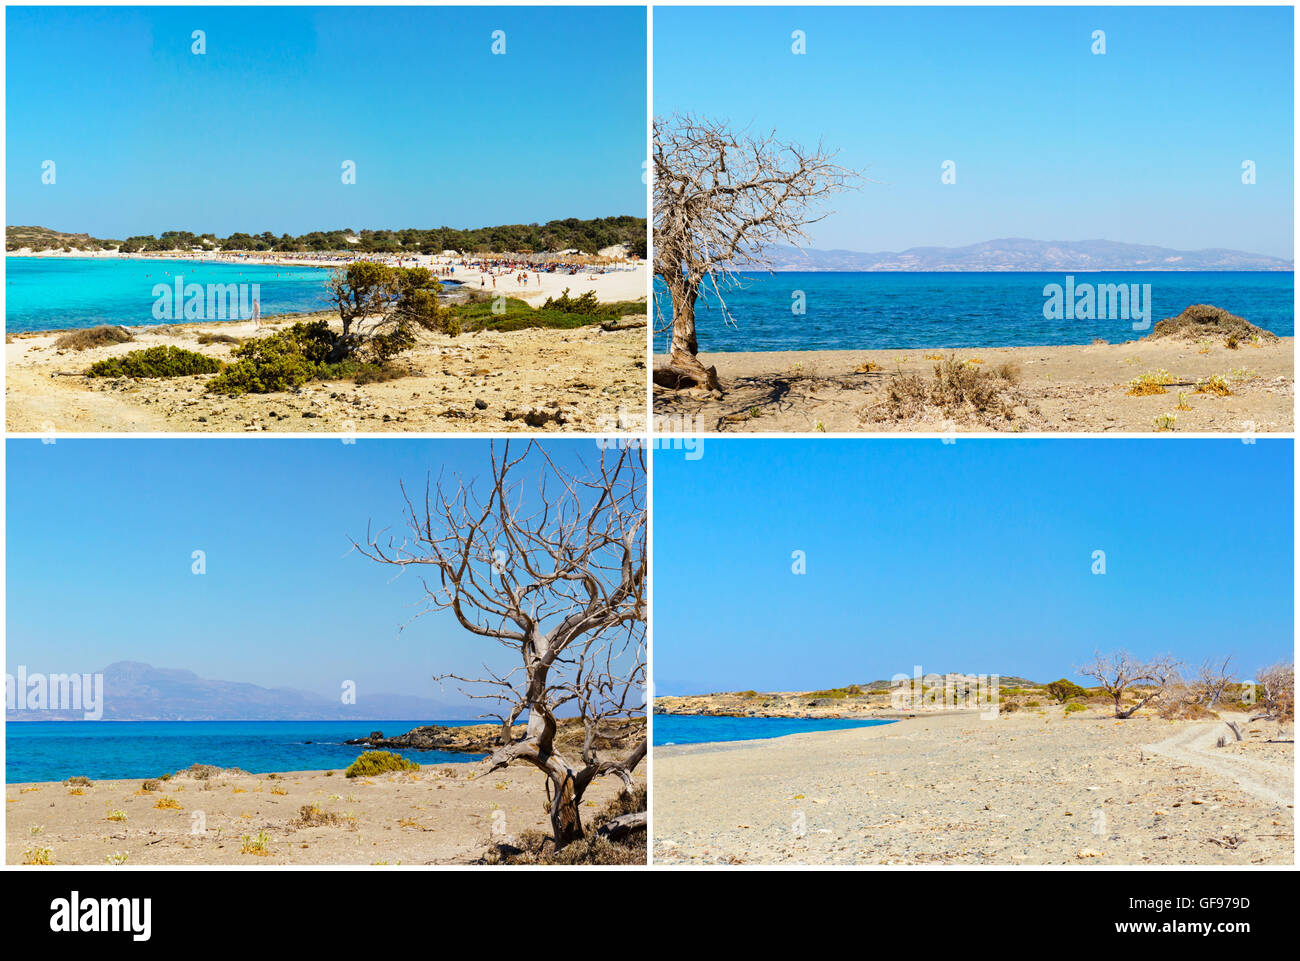 Photo collage with images of Chrissi Island, near Crete, Greece. Stock Photo